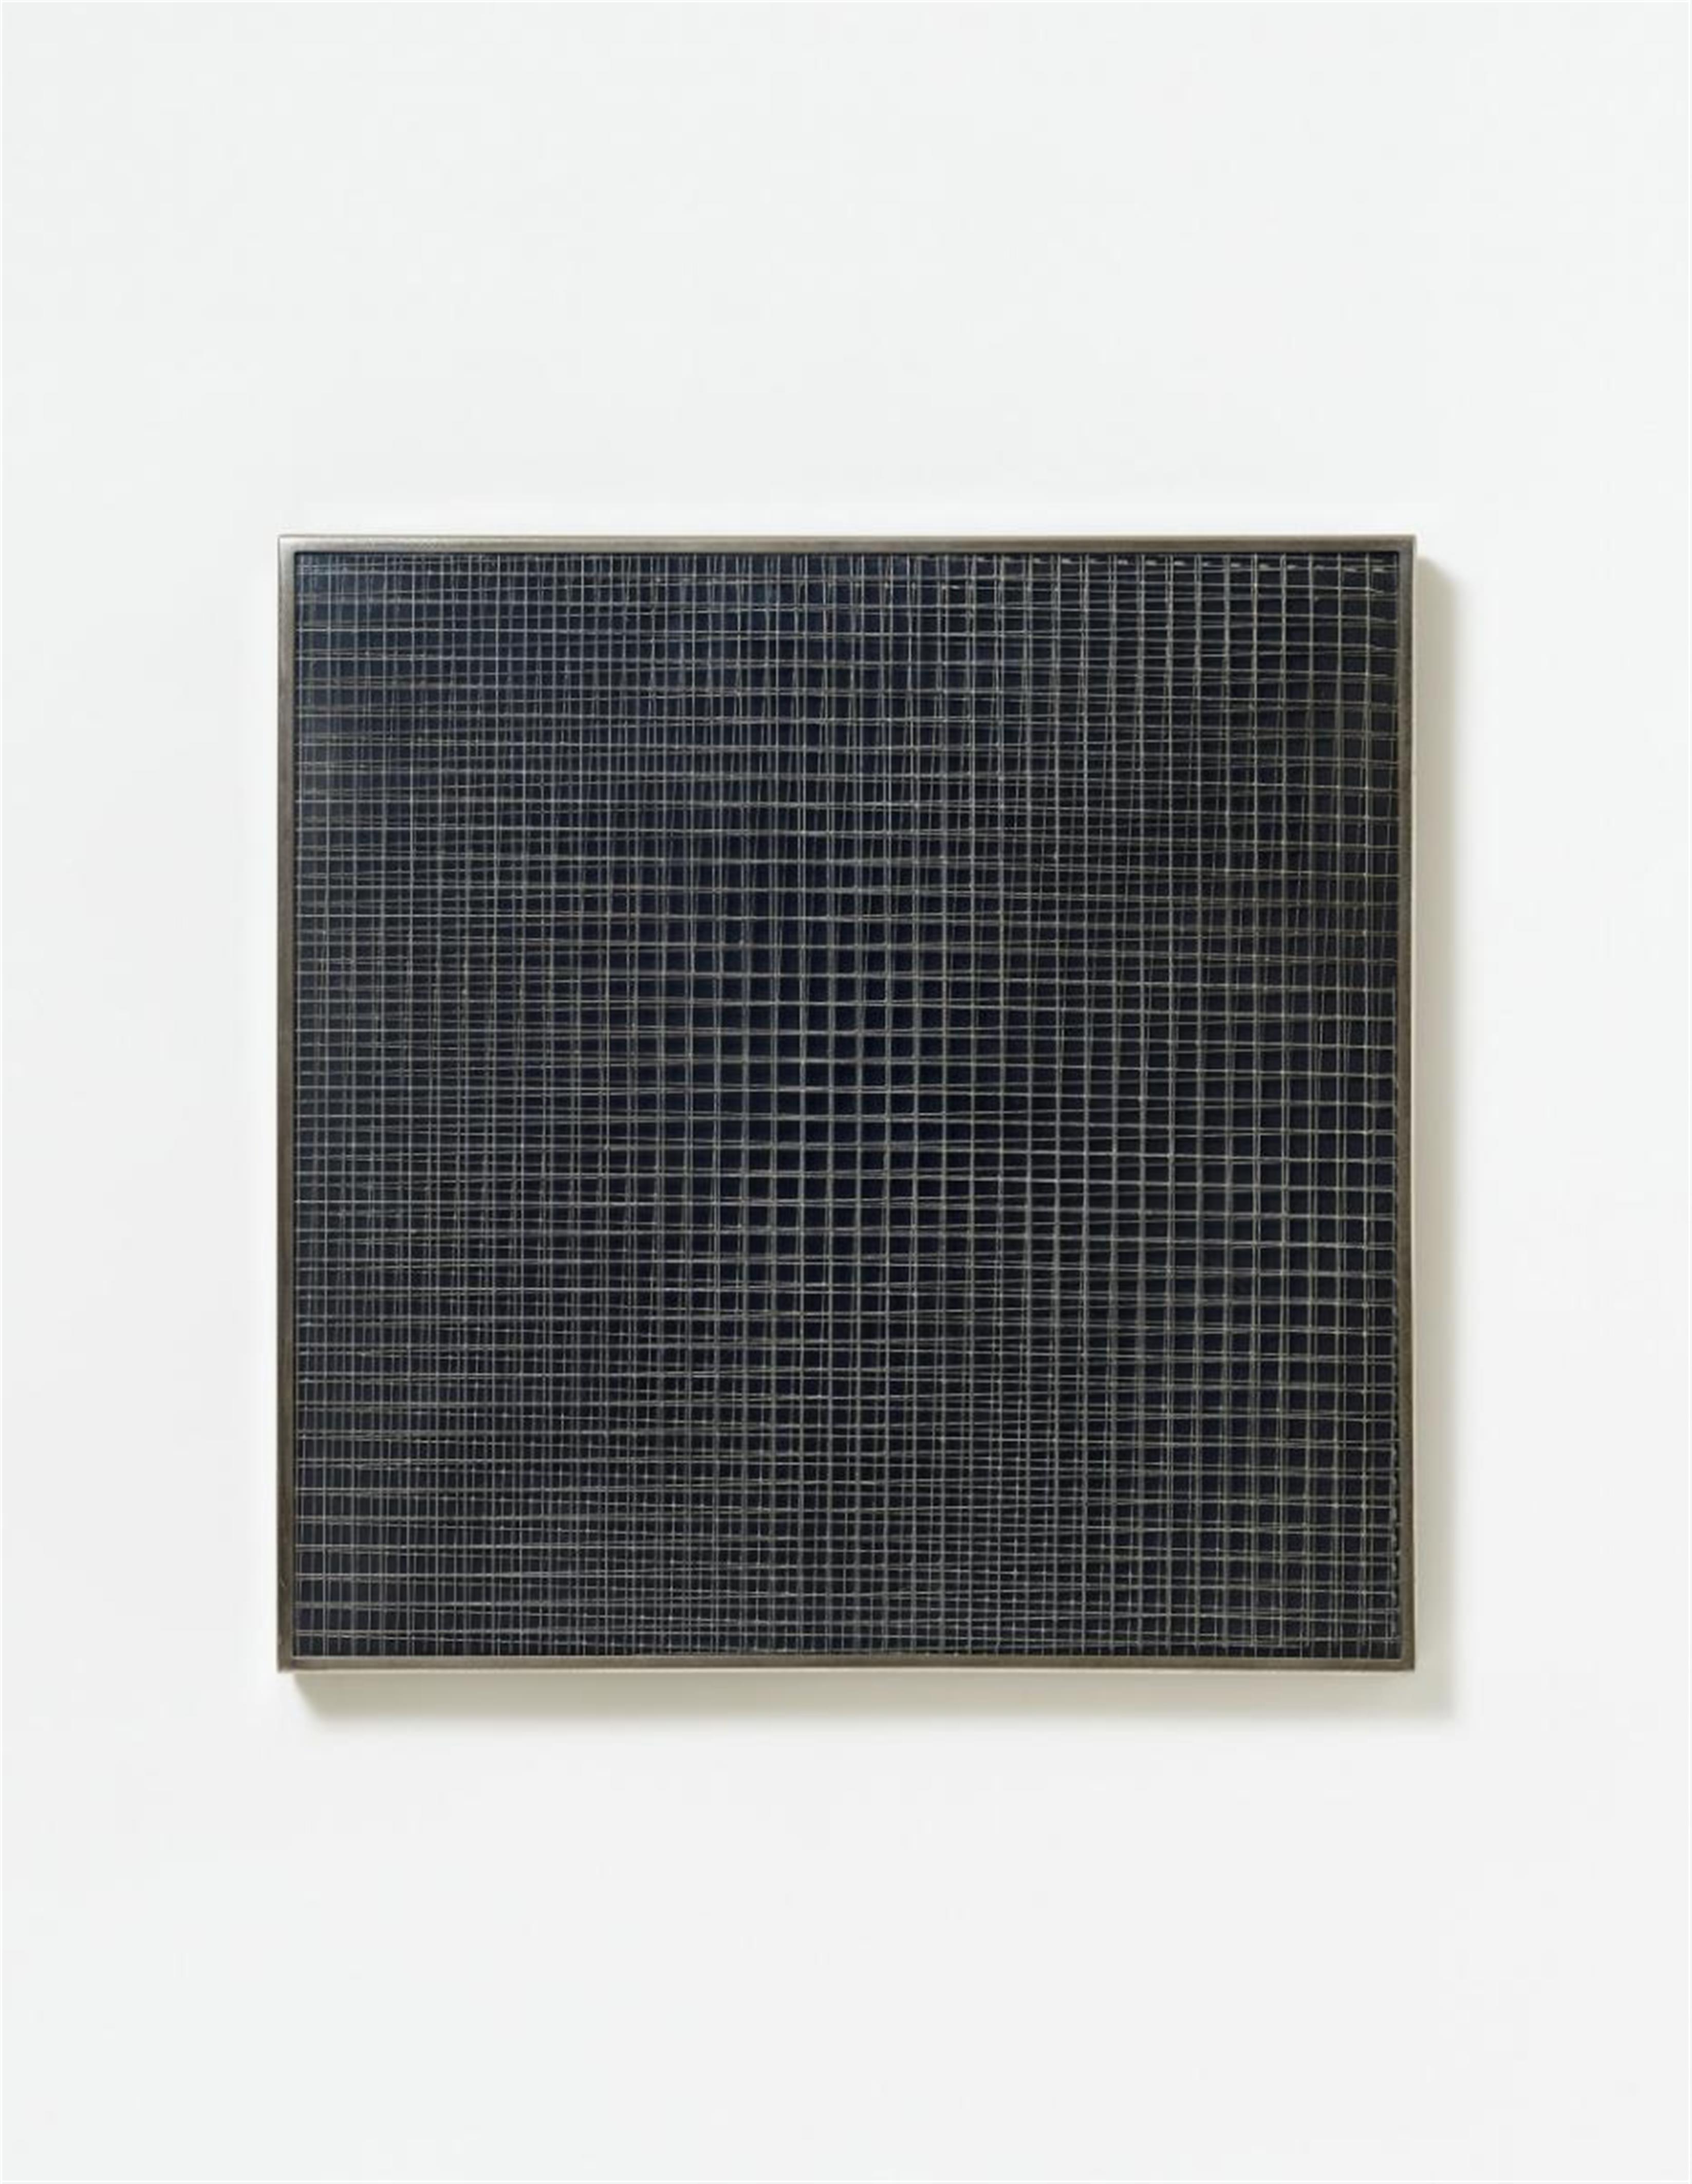 François Morellet - Untitled (from: Édition MAT collection 65) - image-1